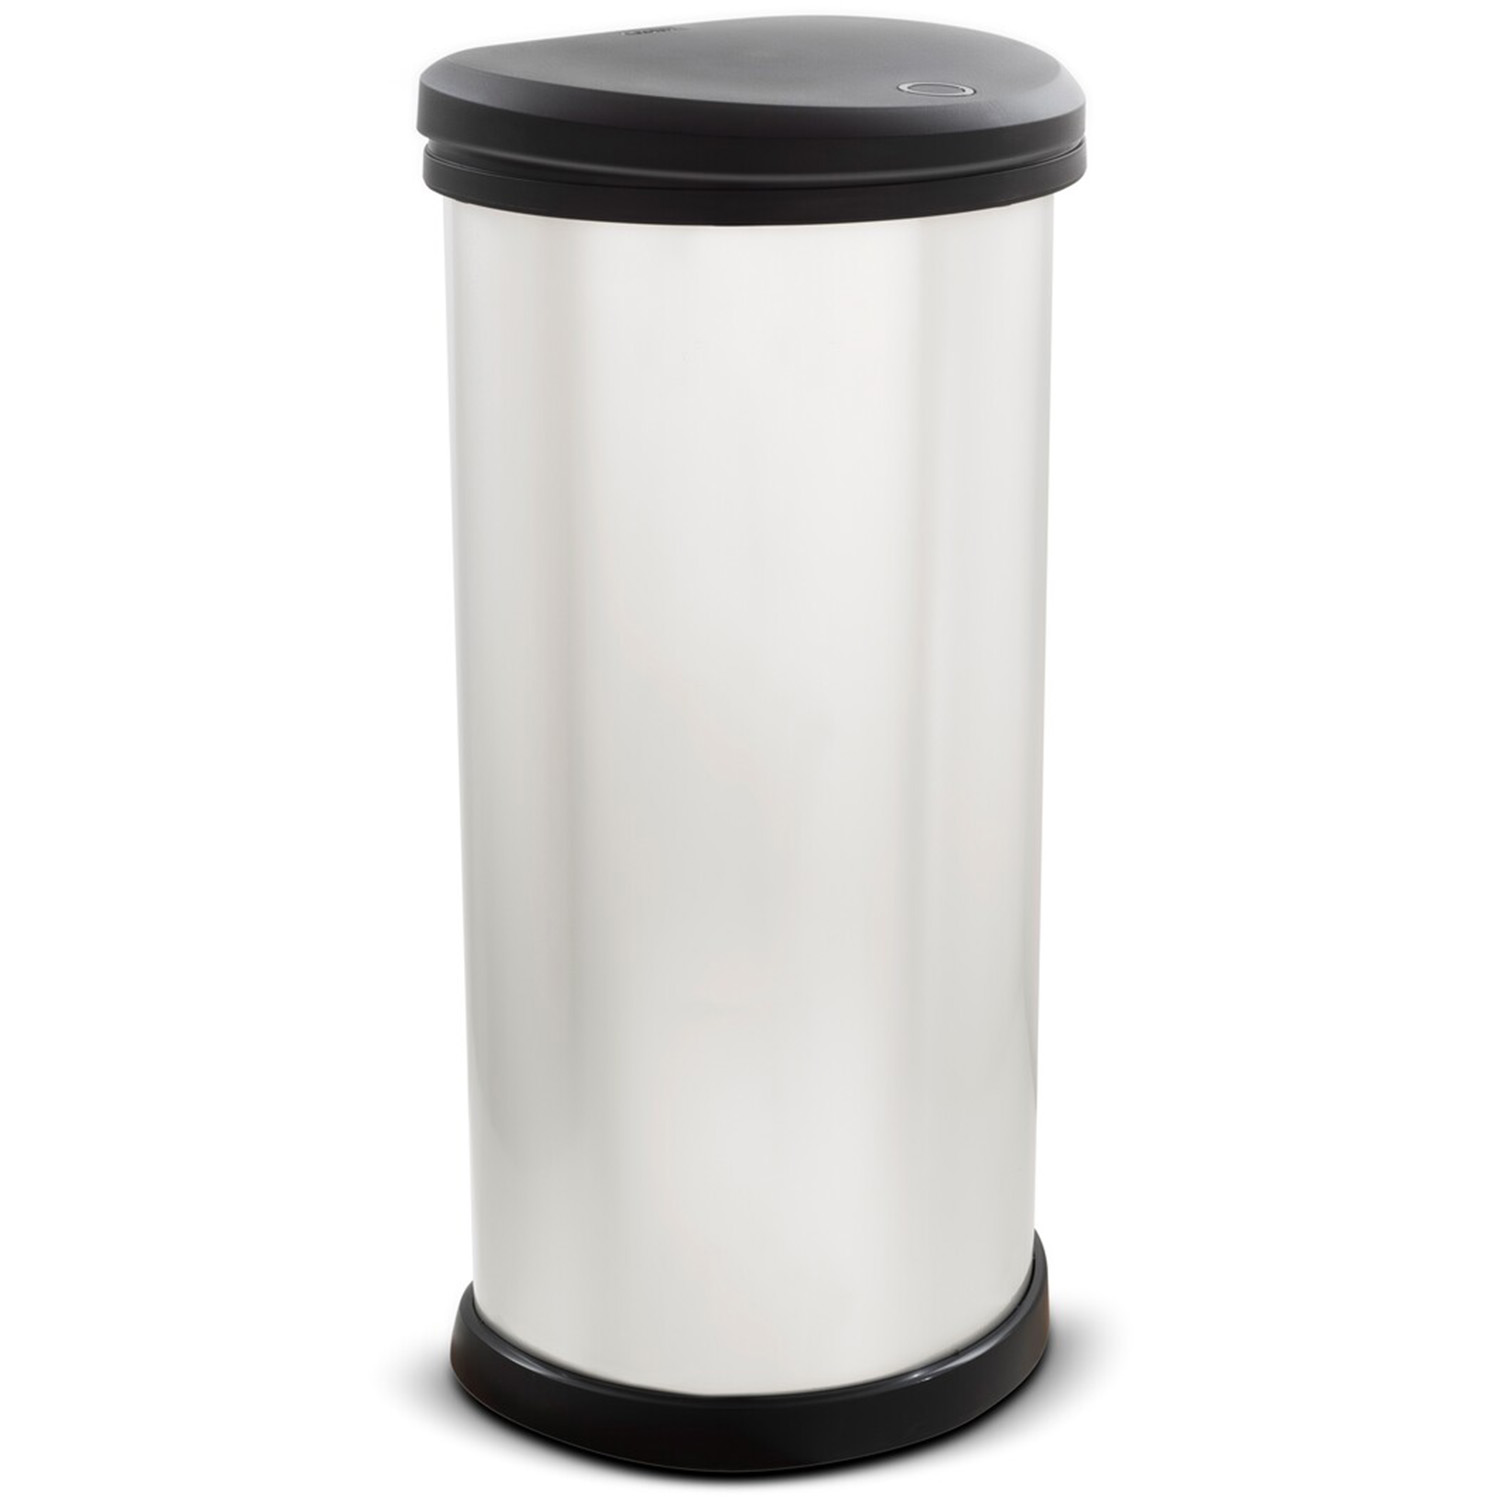 Curver Silver Deco Recycled Bin 40L Image 1